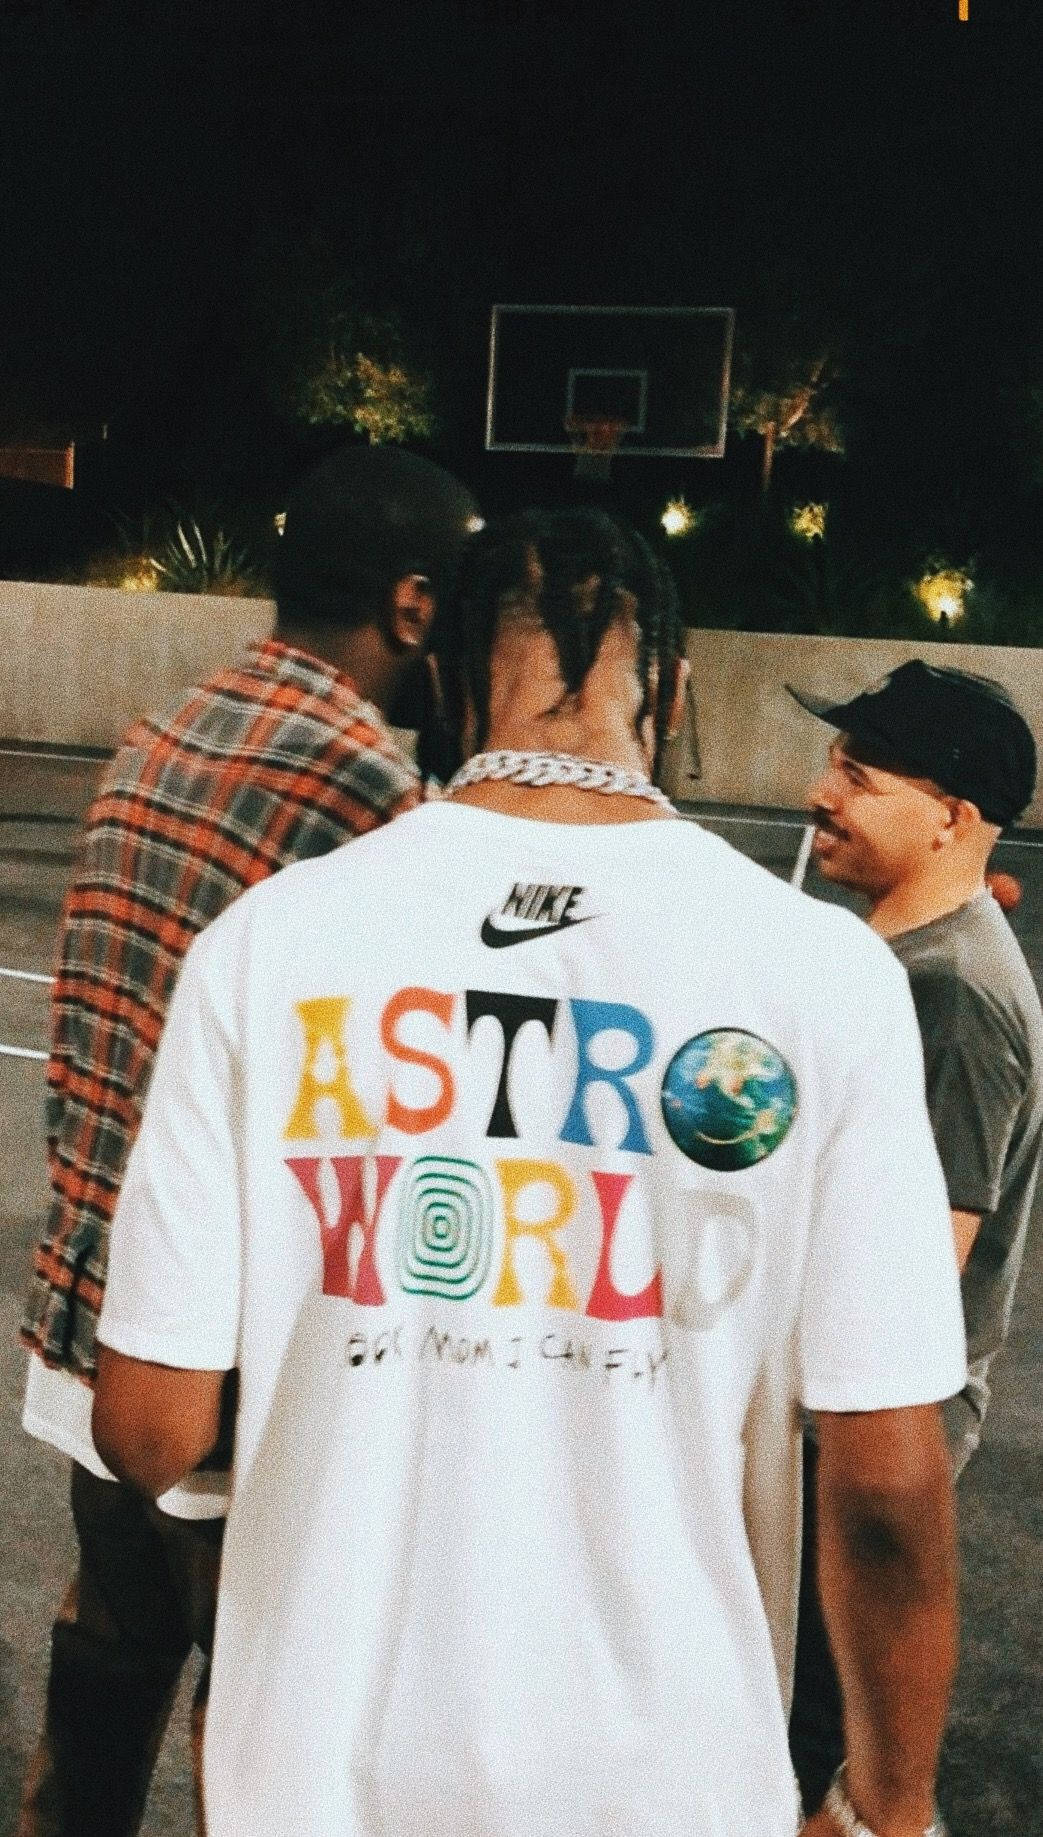 Download Welcome to Astroworld Wallpaper | Wallpapers.com